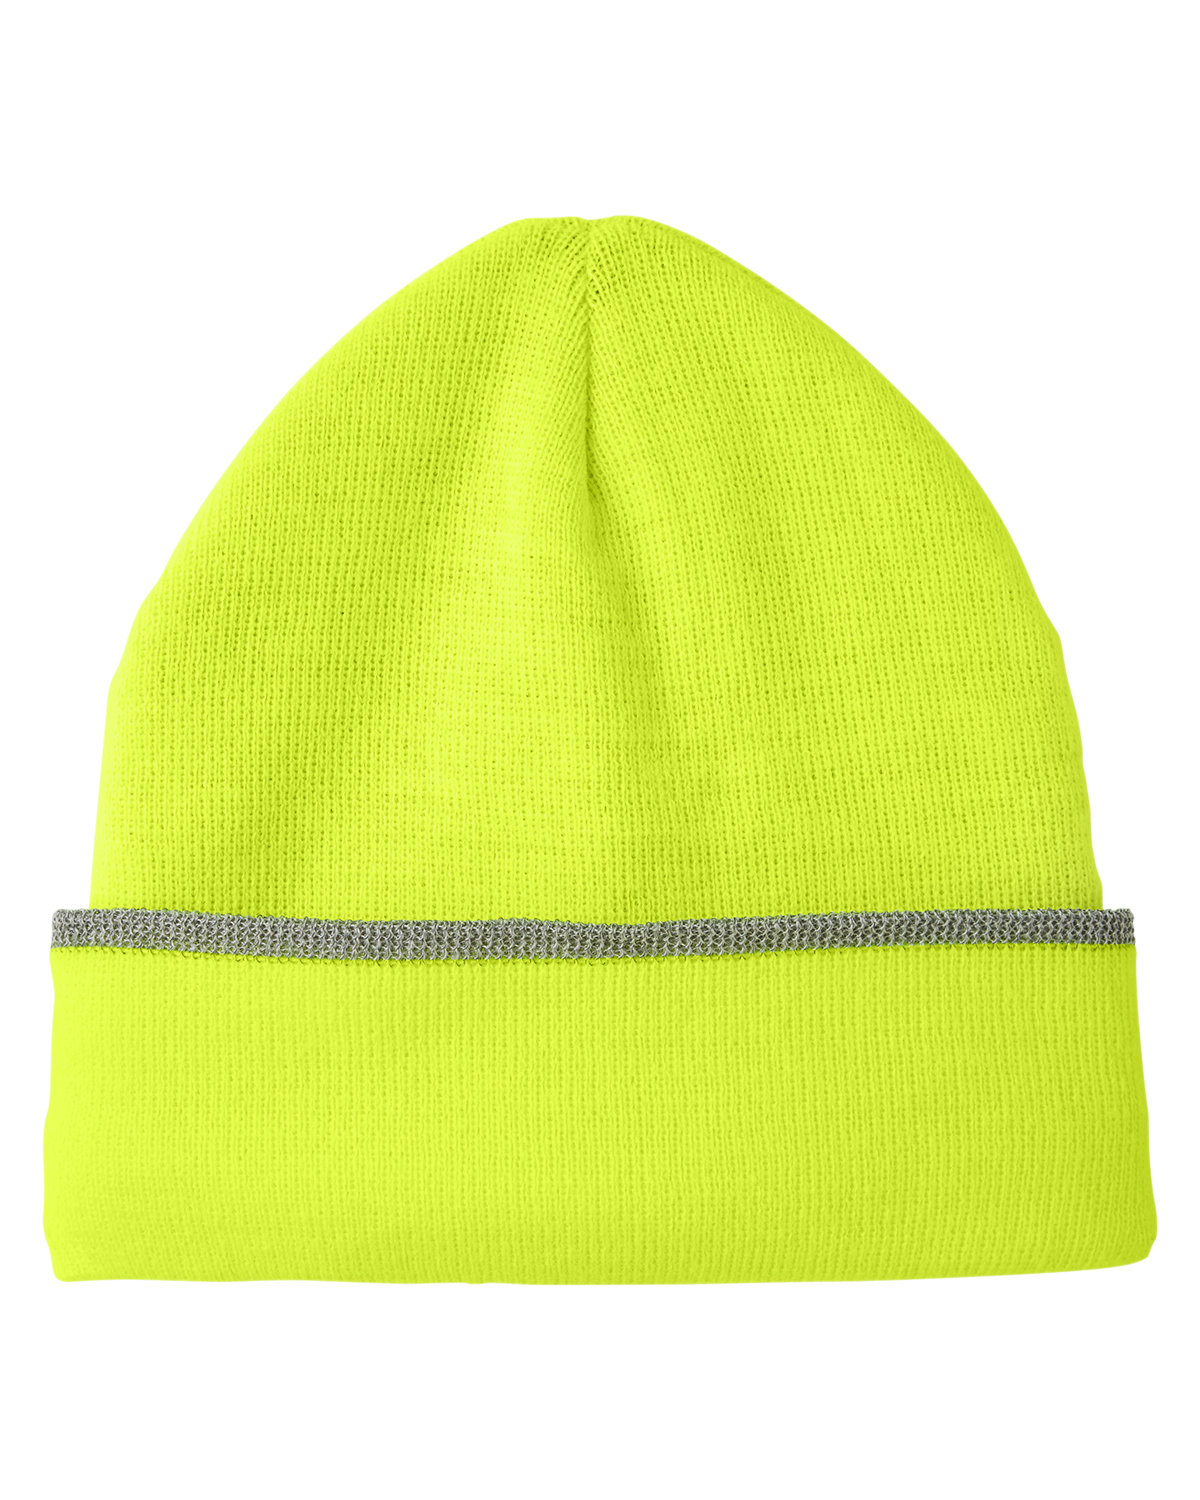 Picture of Harriton ClimaBloc™ Lined Reflective Beanie